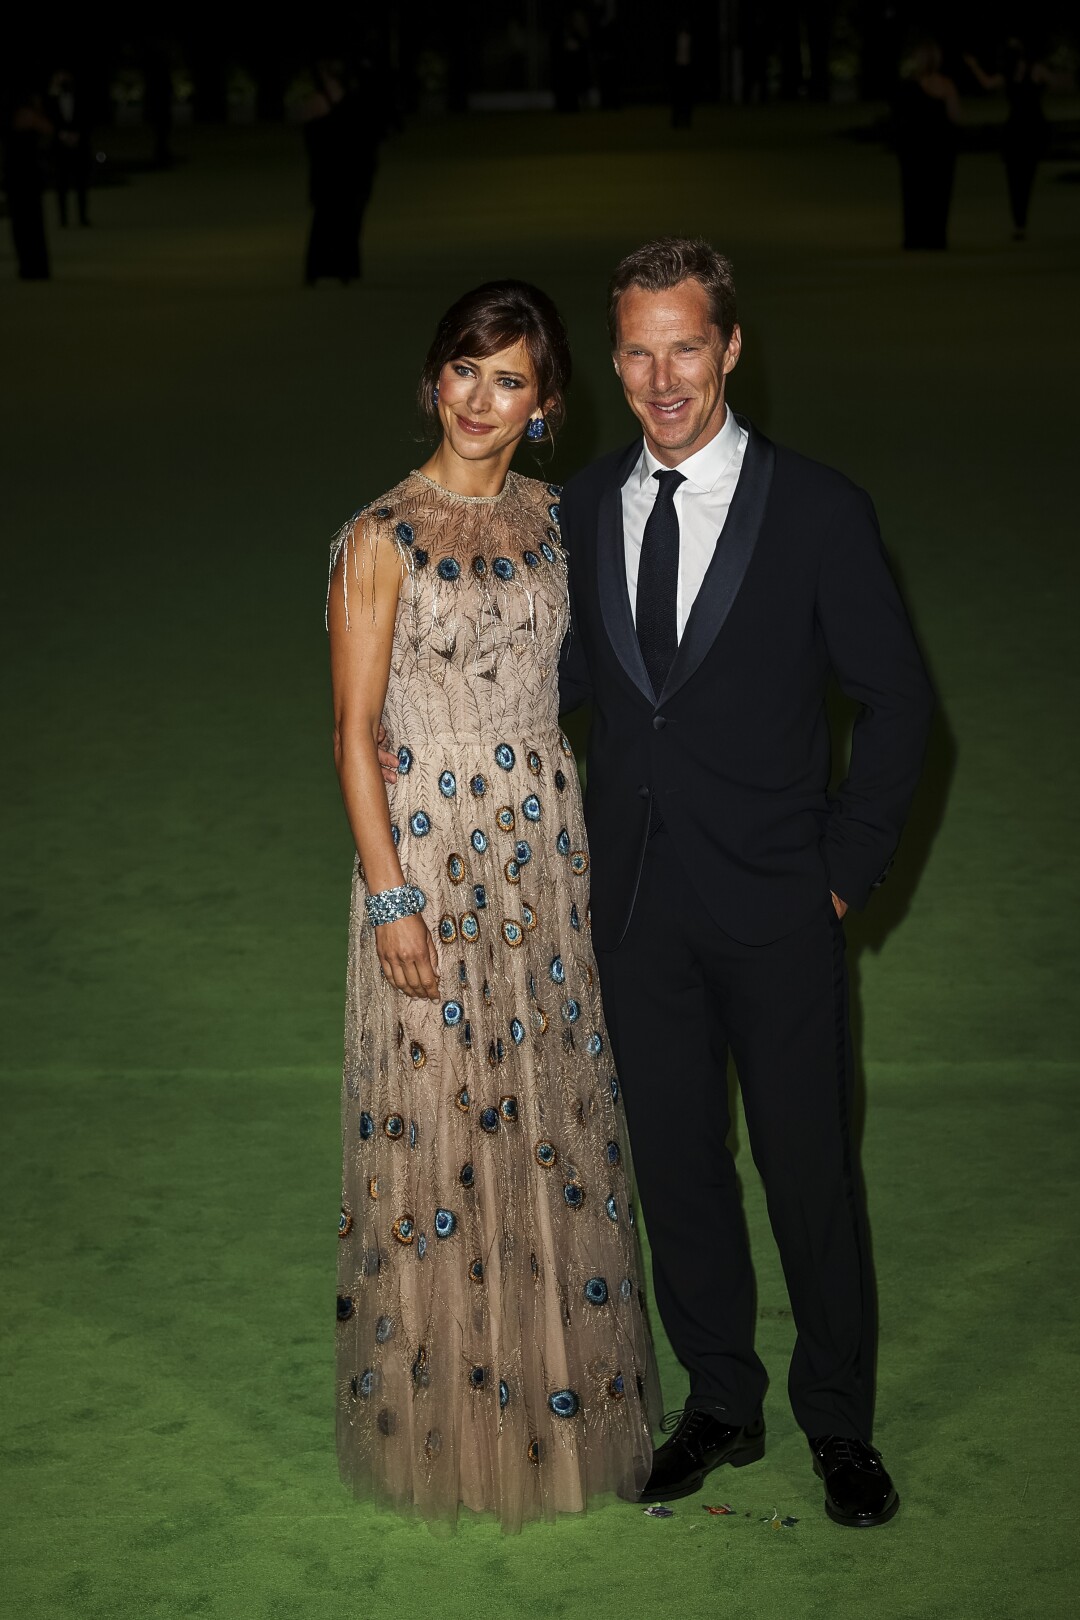 A woman in a patterned dress and a man in a black suit and tie posing on a green carpet